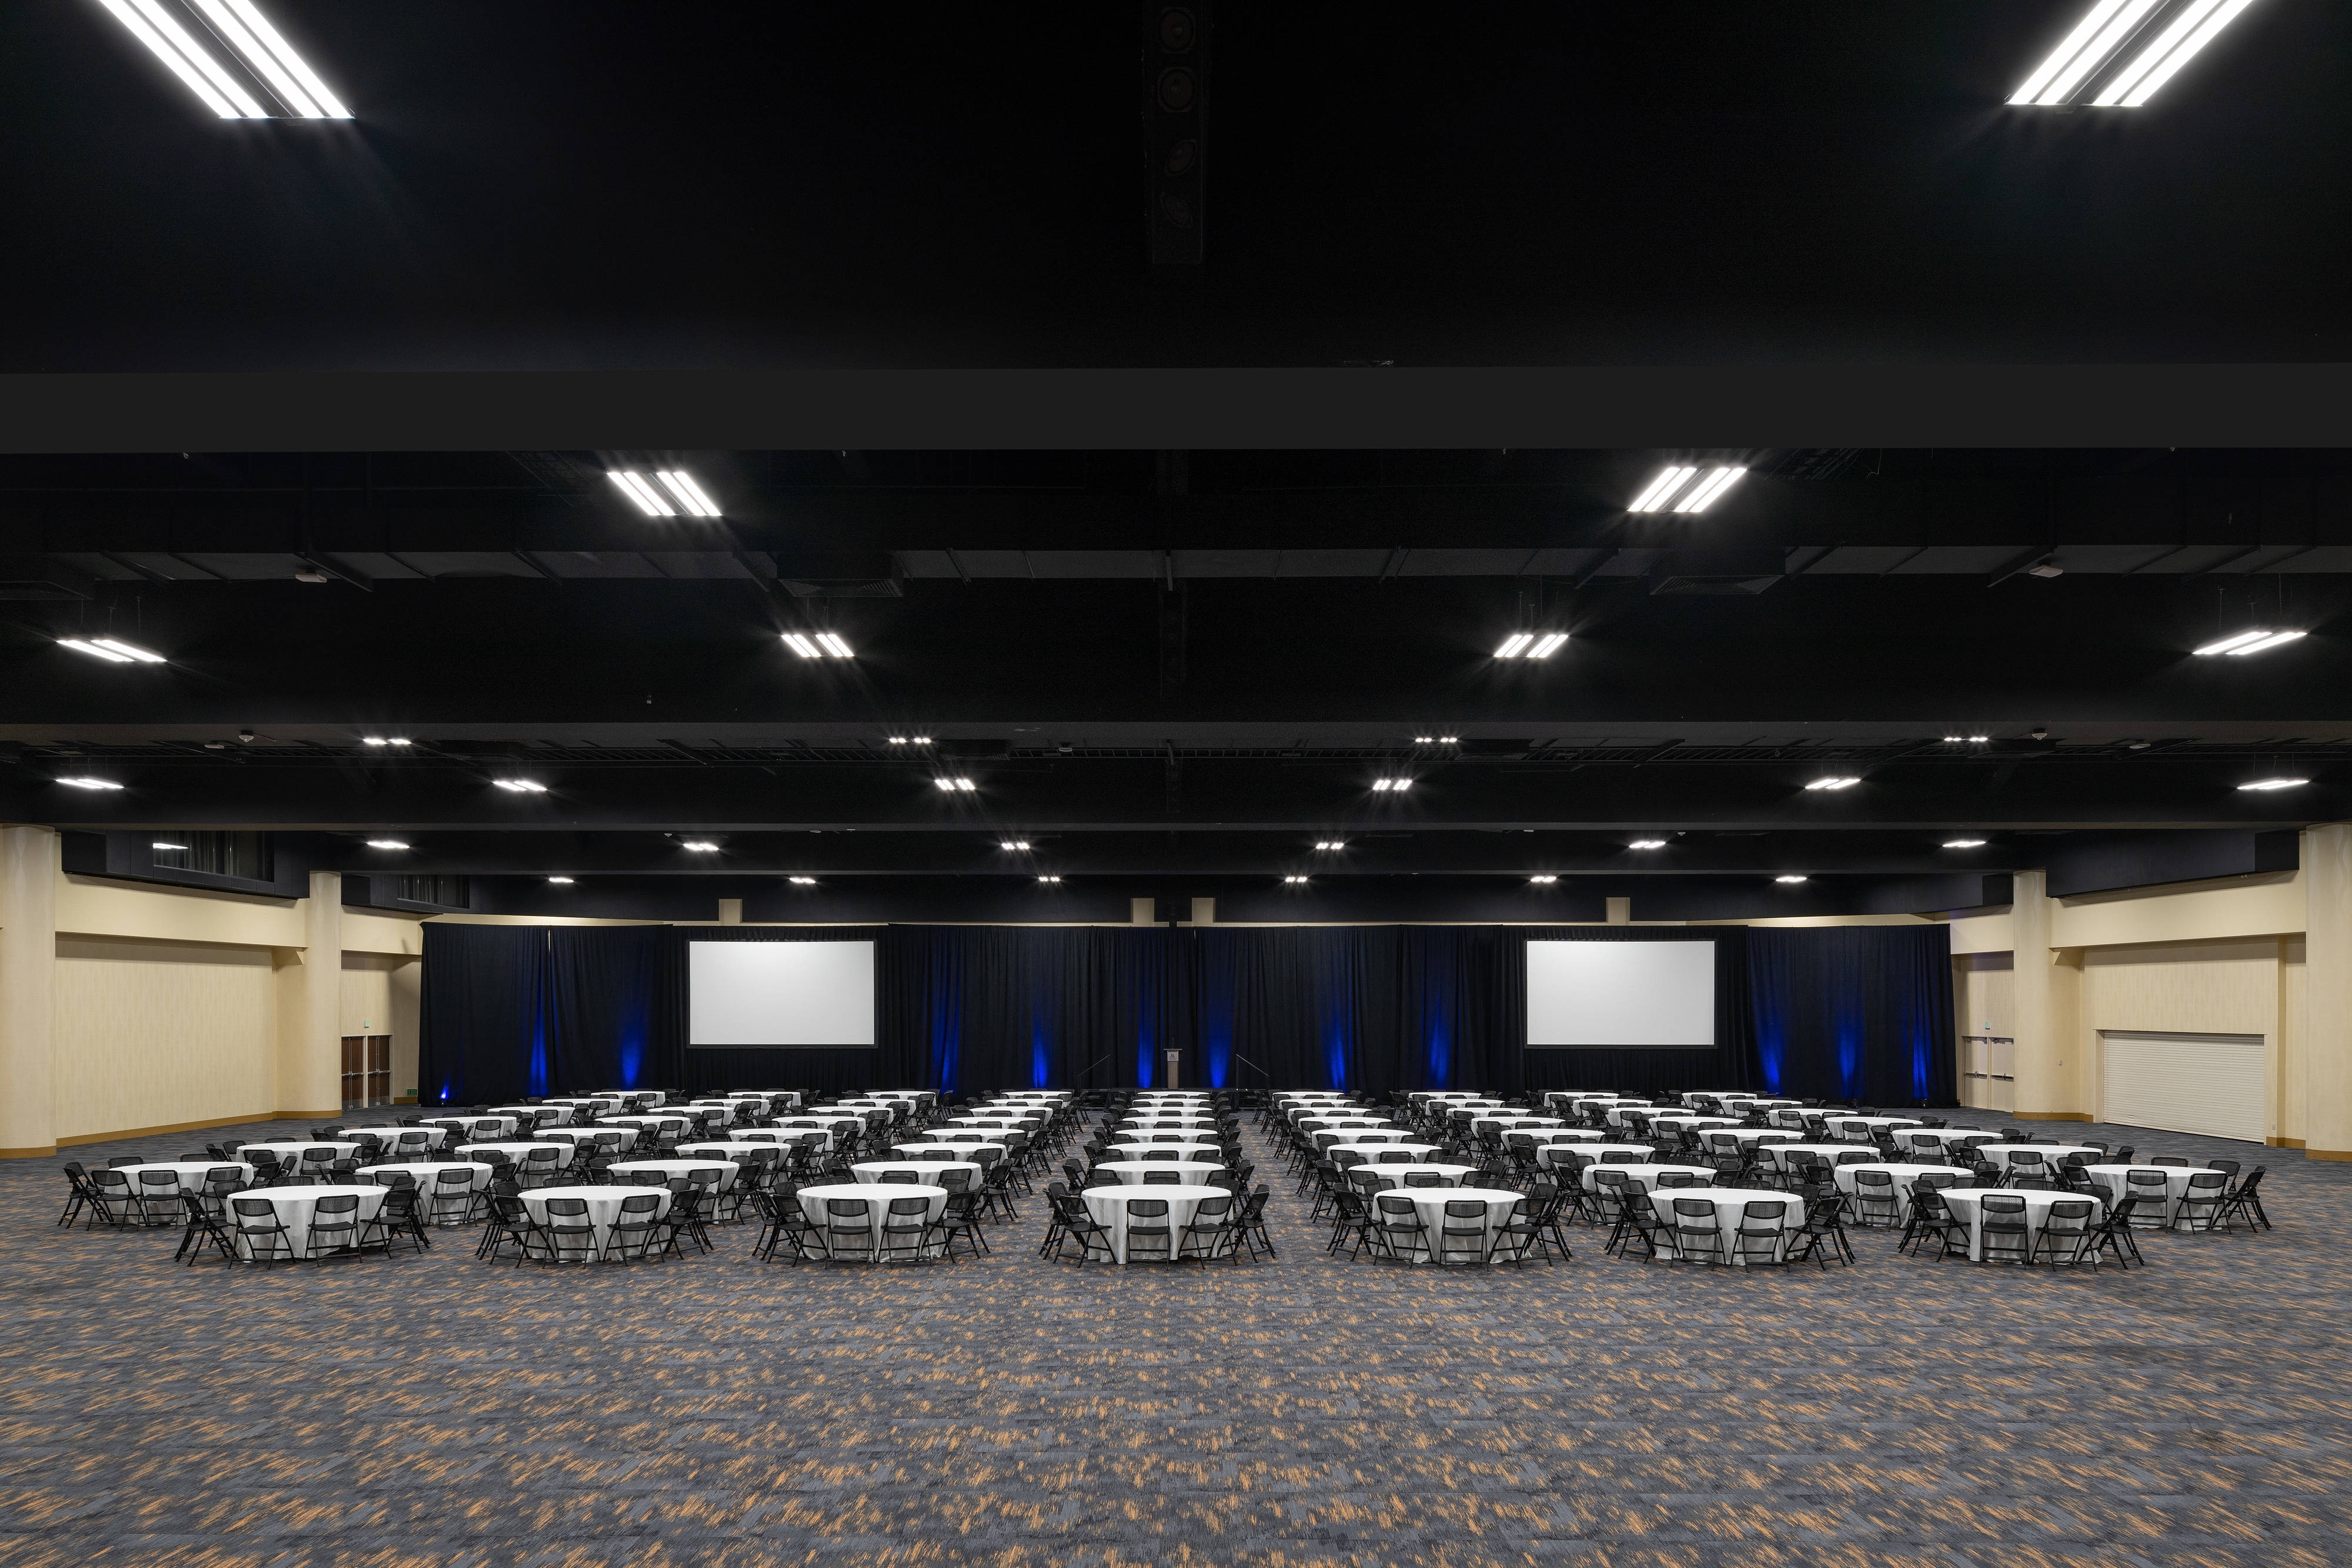 West Exhibit Hall theater setup with dozens of round tables